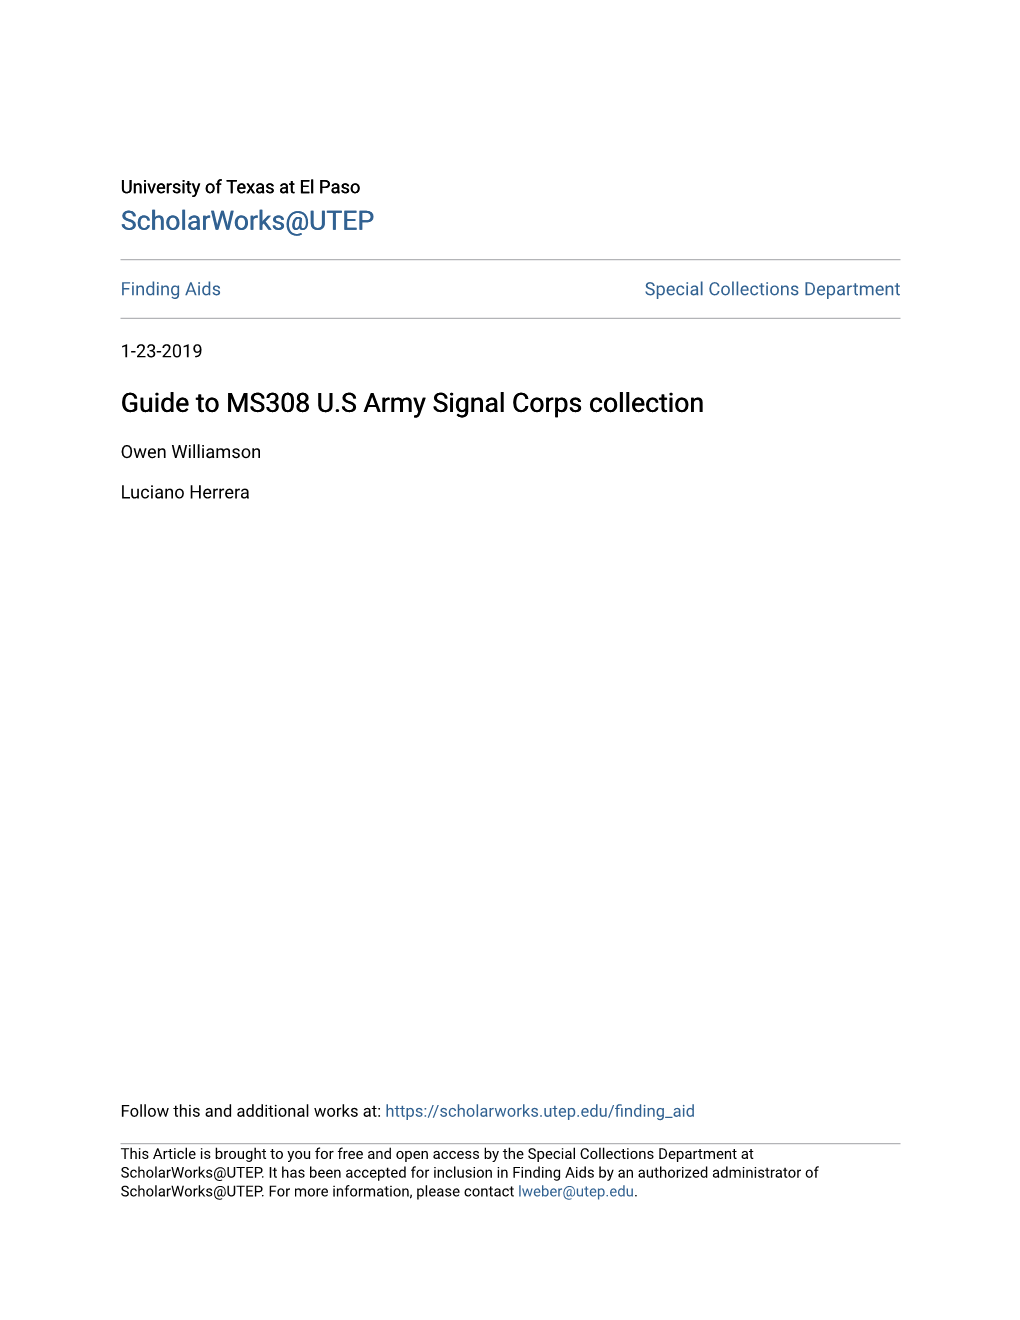 Guide to MS308 US Army Signal Corps Collection